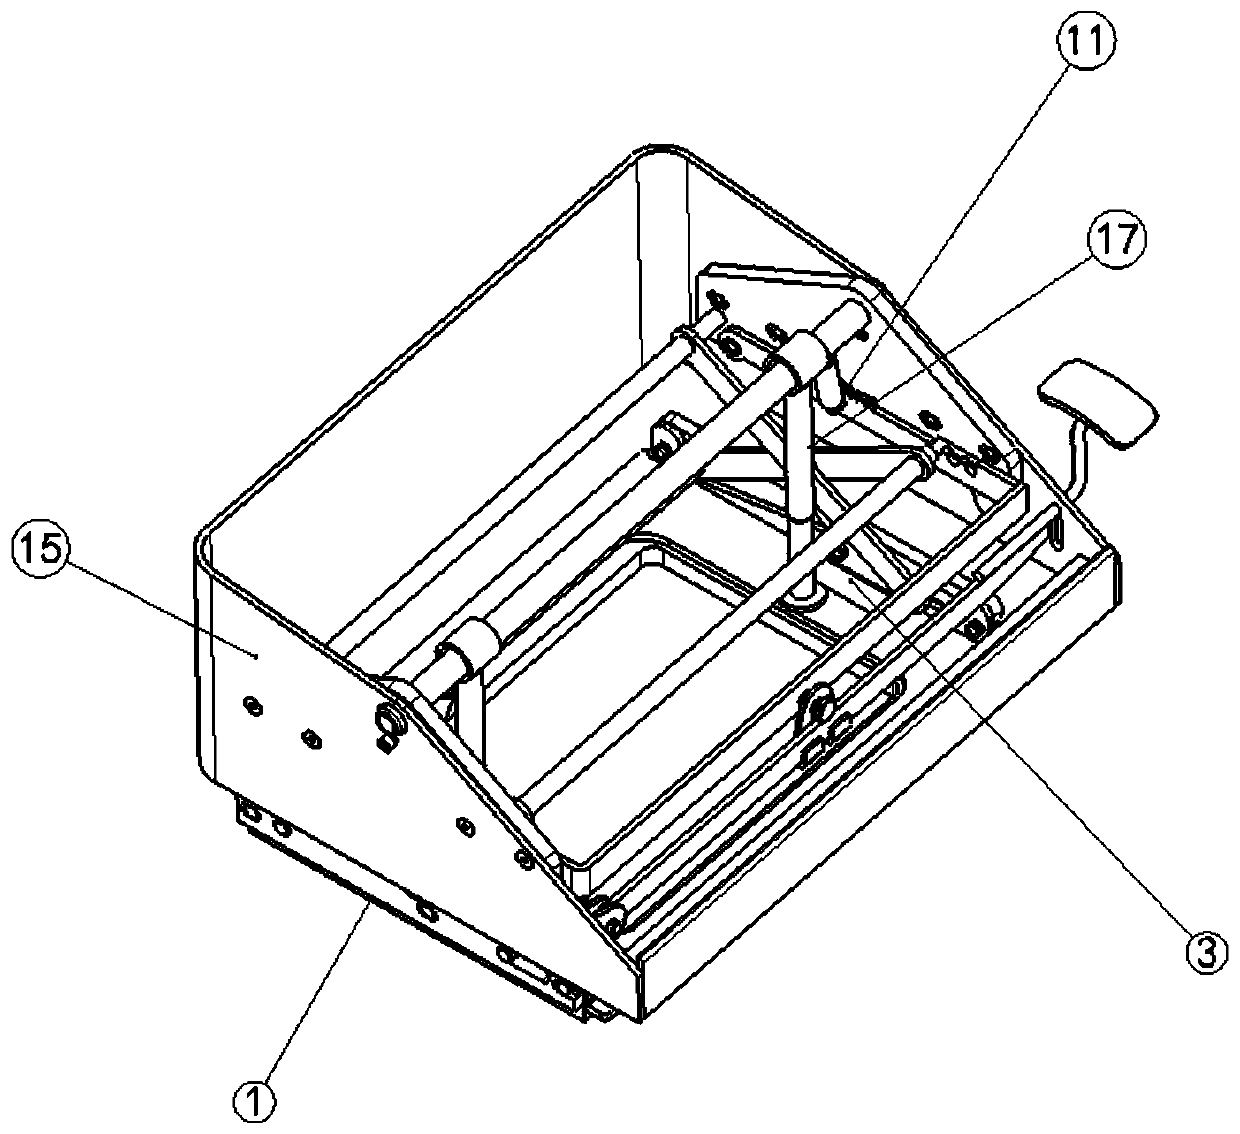 An adjustable driver's pedal for an urban rail vehicle